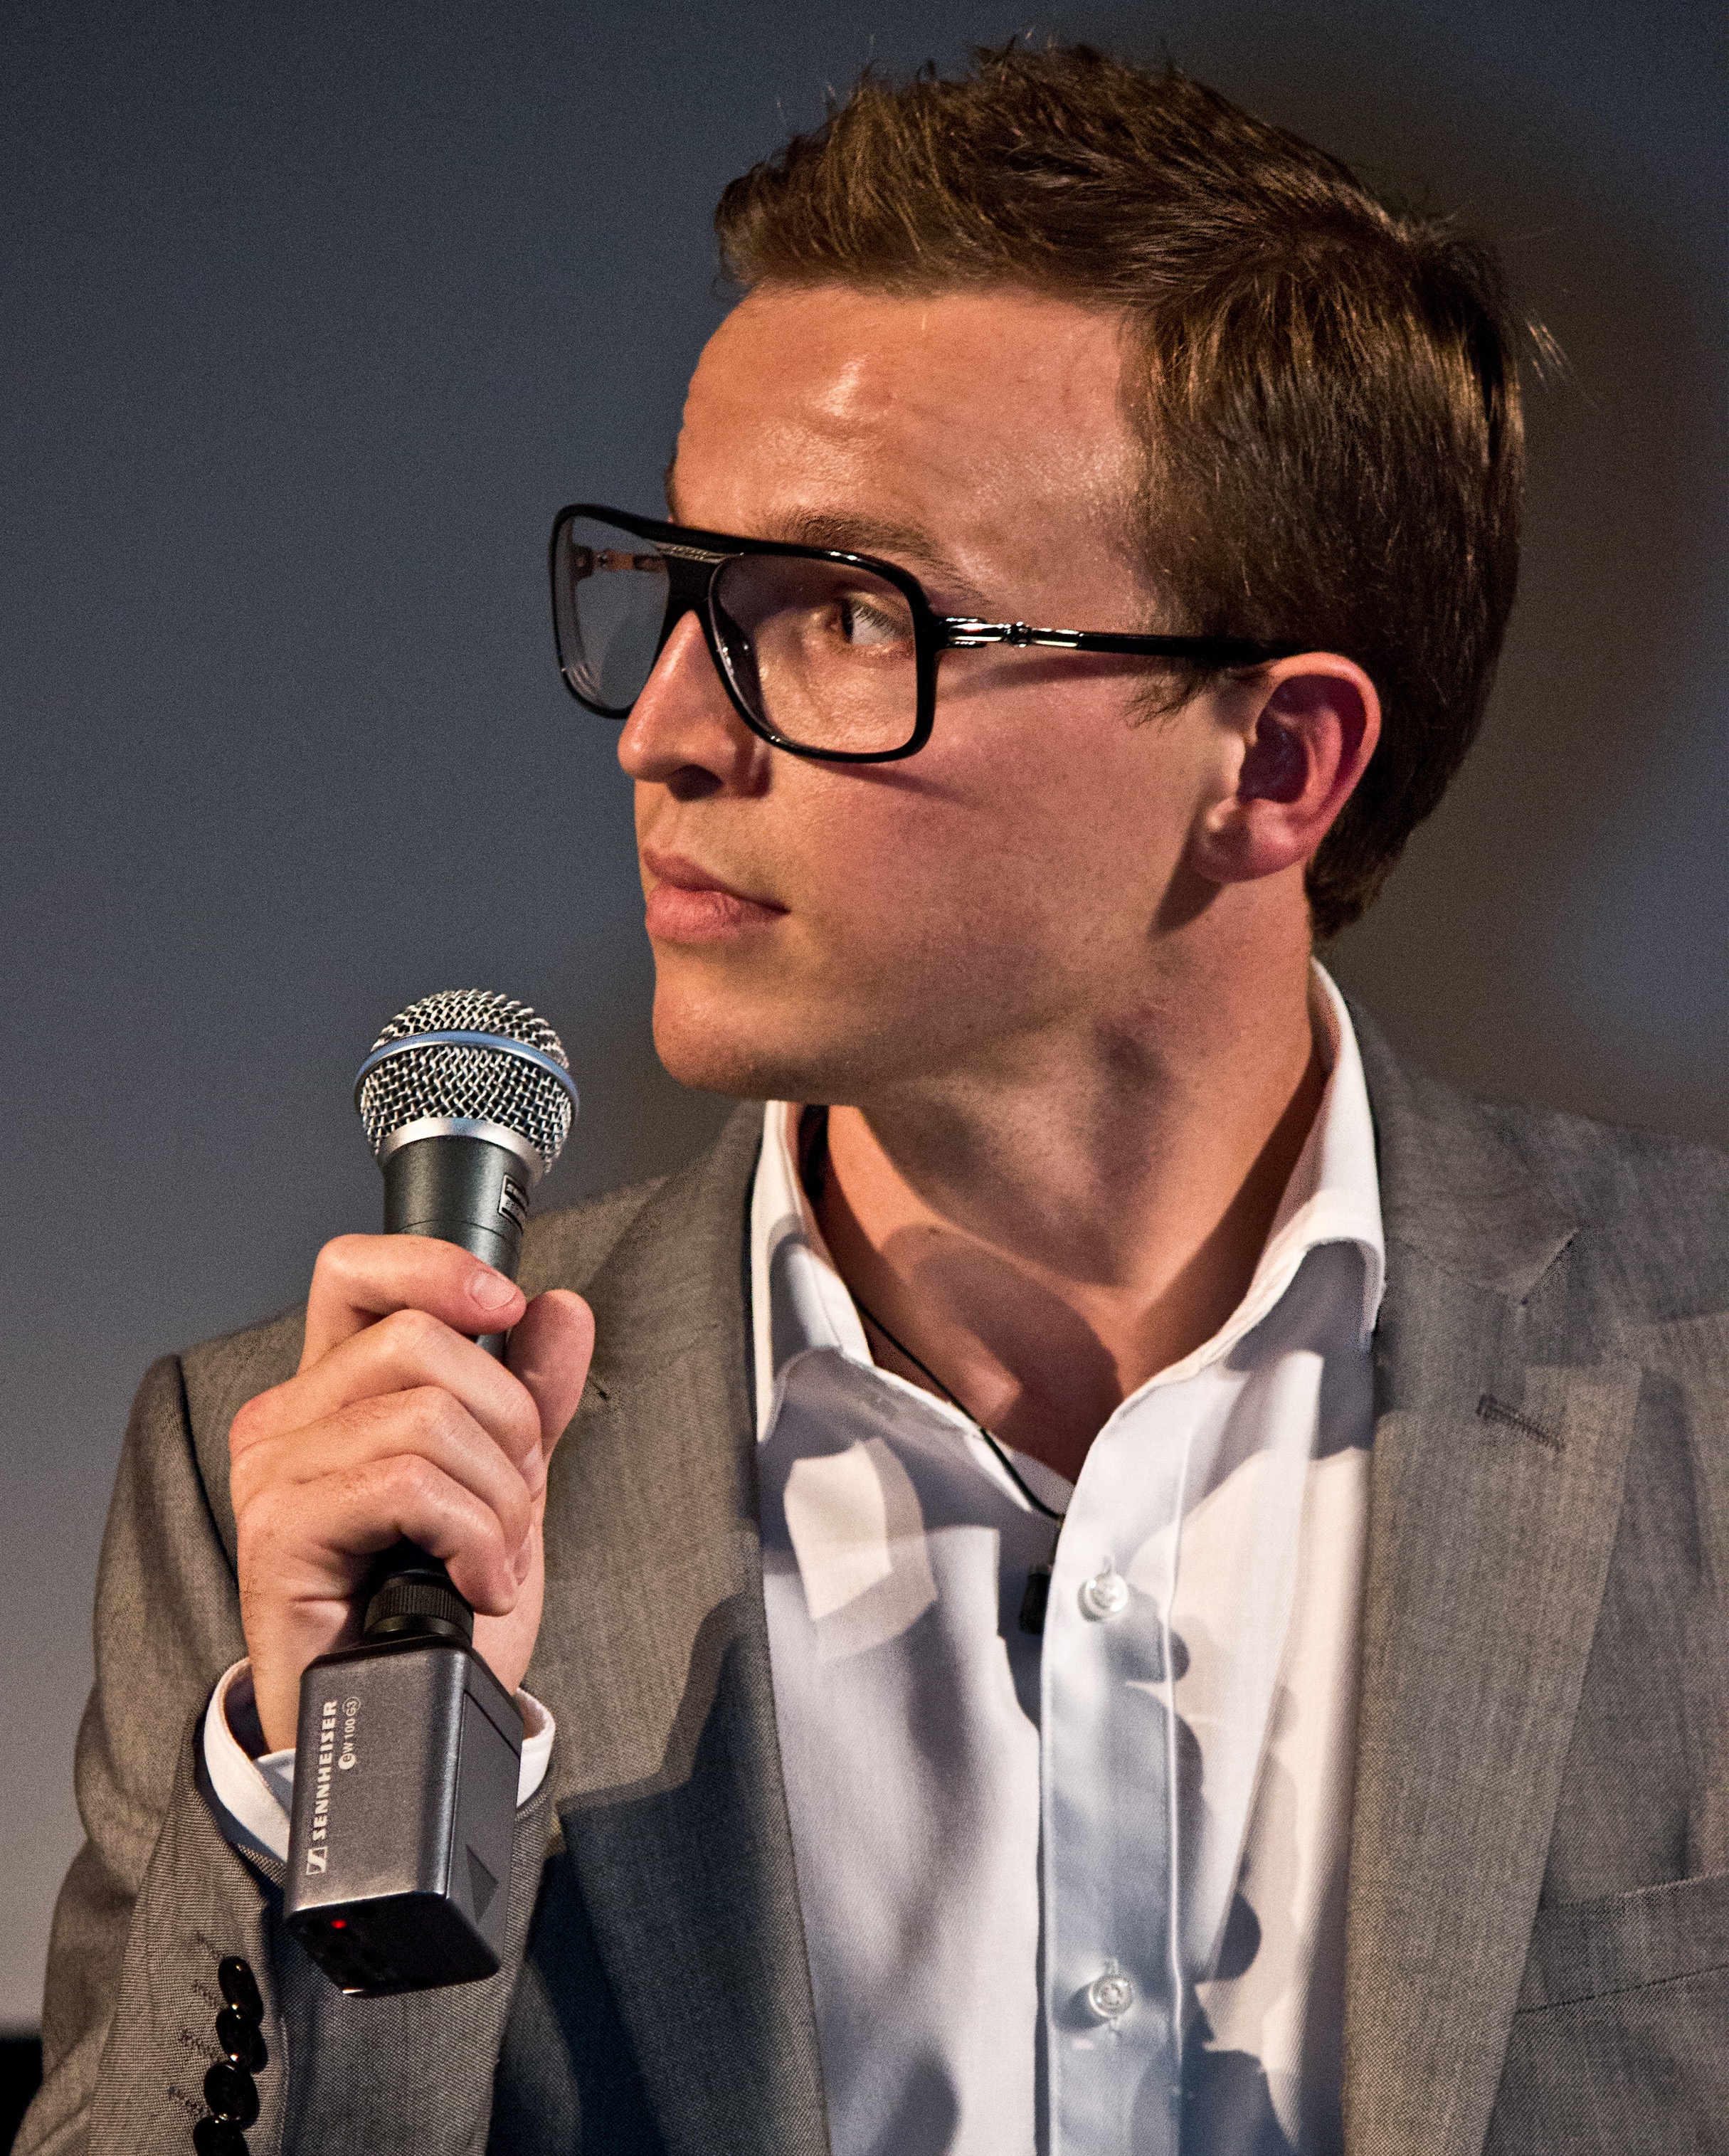 Kyle McCachen on a panel subsequent to his film premiere (2015).